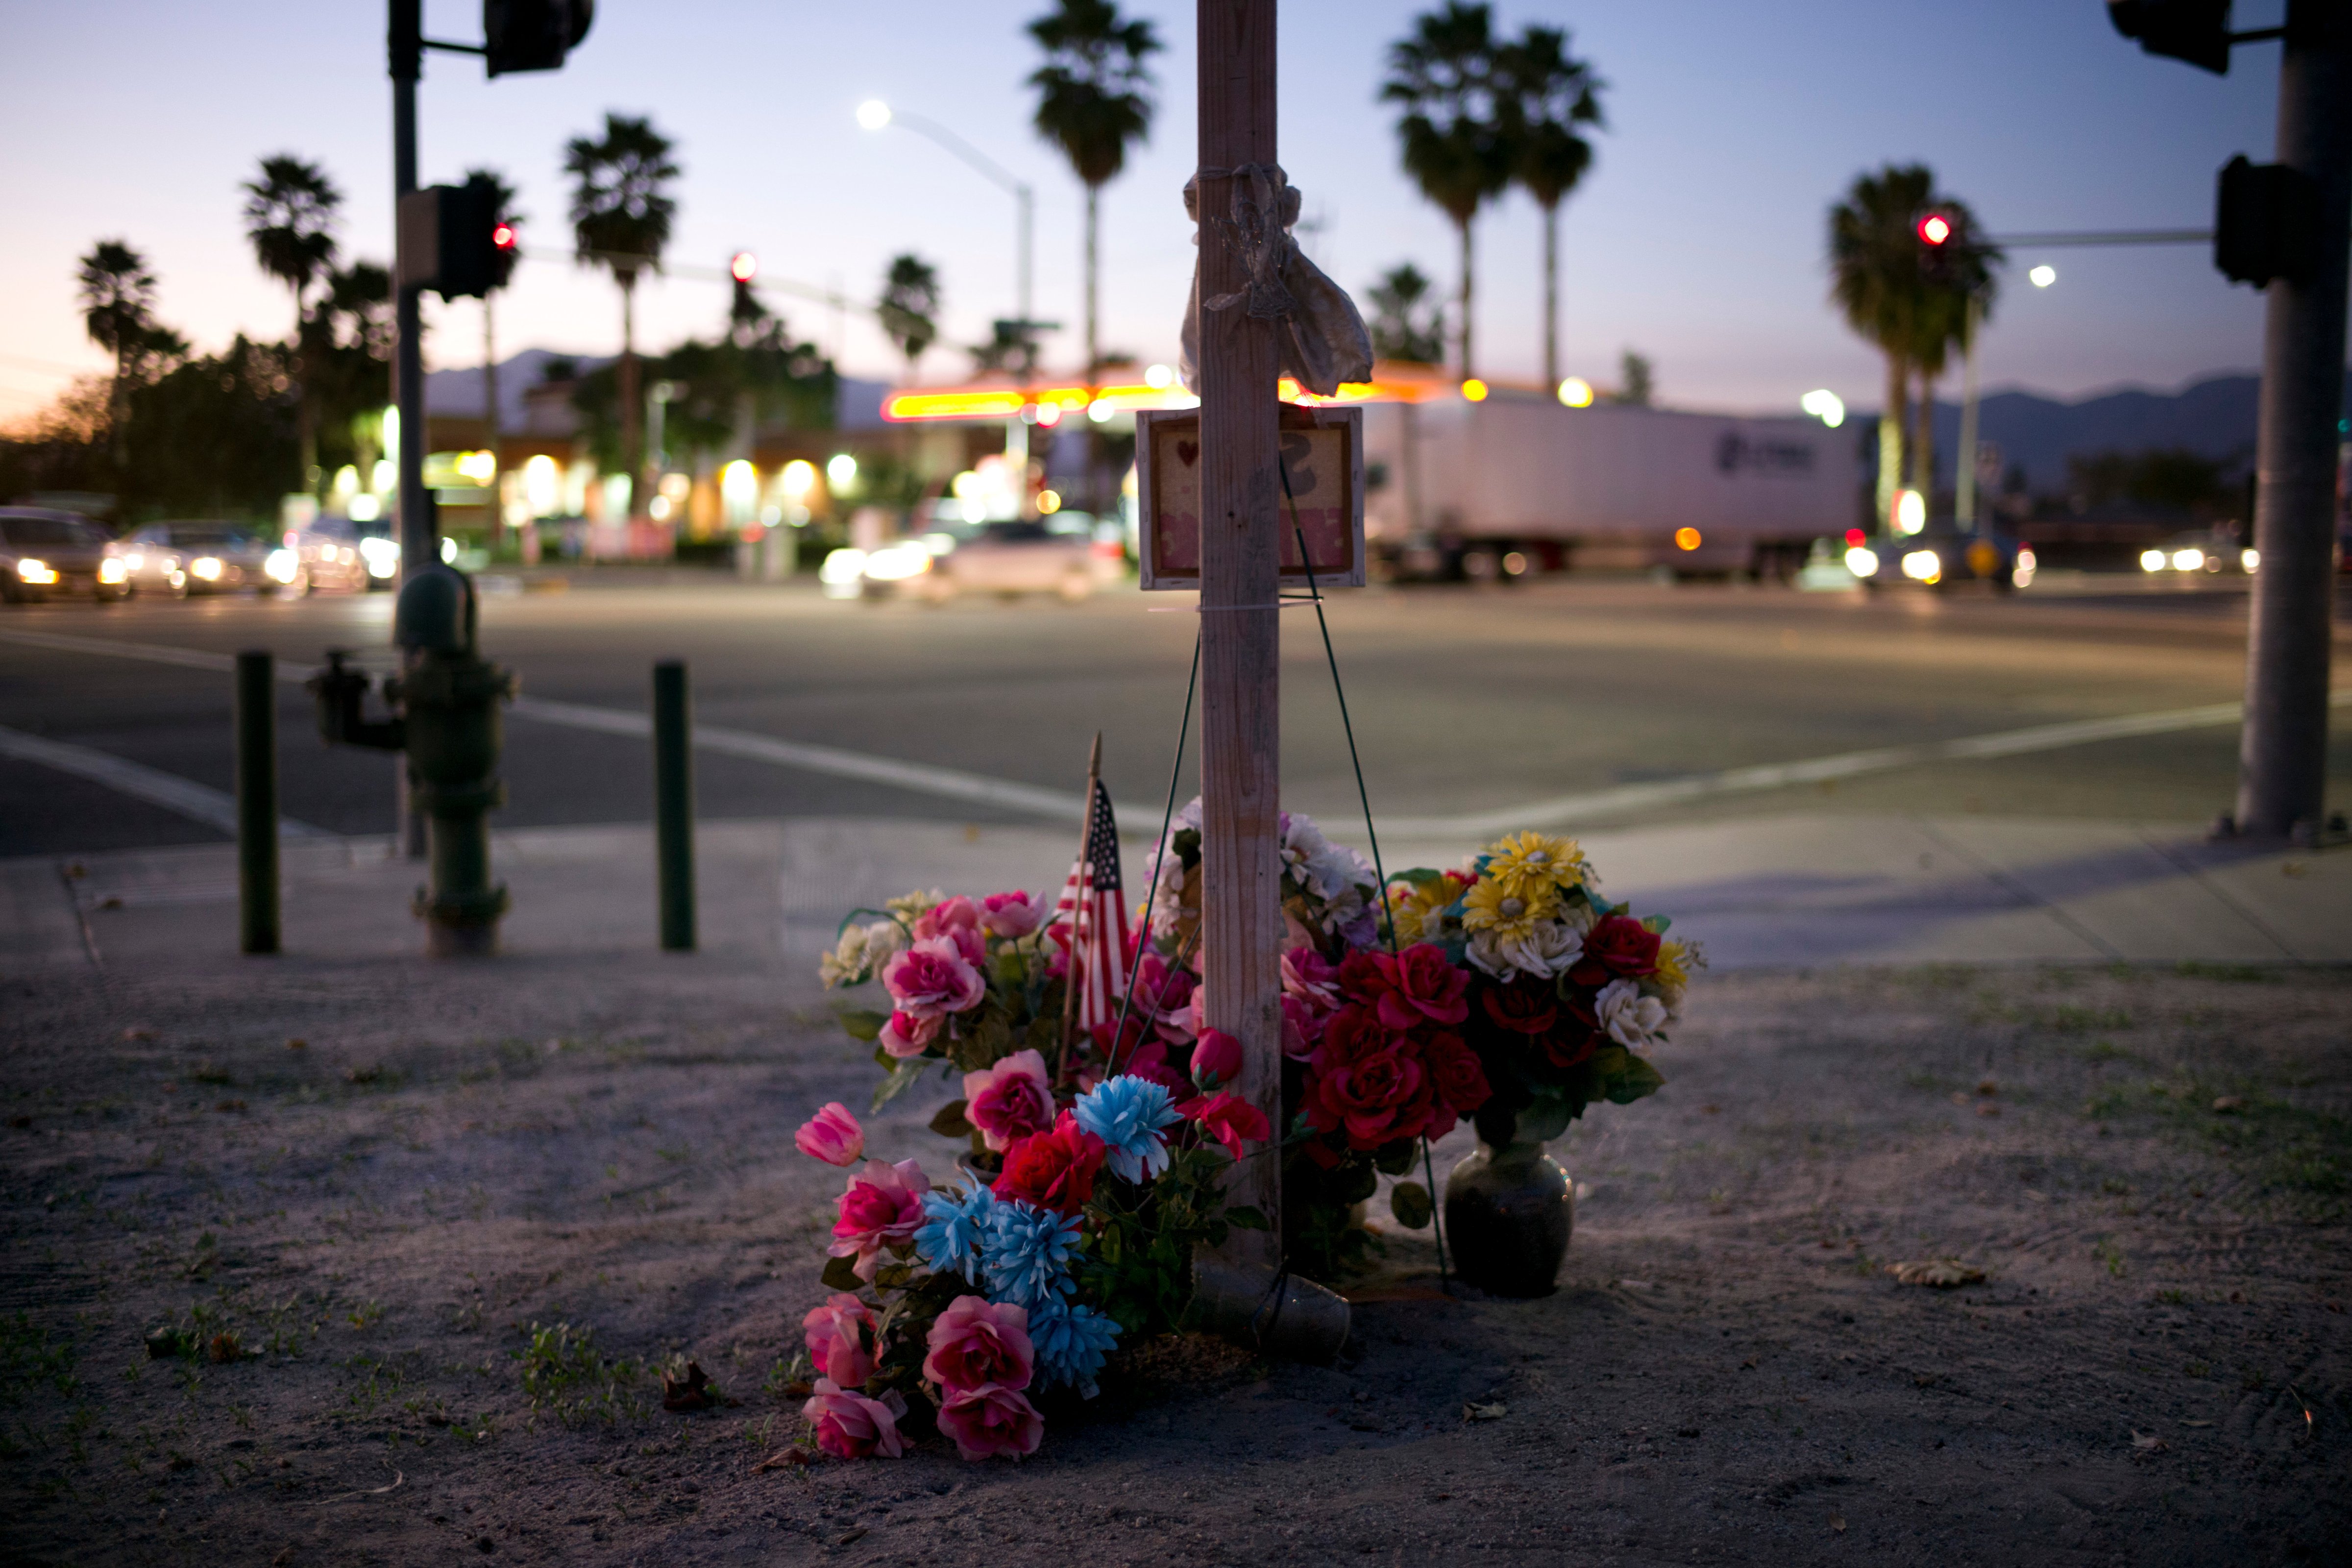 Artificial flowers are placed around a wood cross at a makeshift memorial site Nov. 15, 2016, near the Inland Regional Center, in San Bernardino, Calif., to honor the victims who were killed in the Dec. 2, 2015, terror attack at the center. (Jae C. Hong—AP)